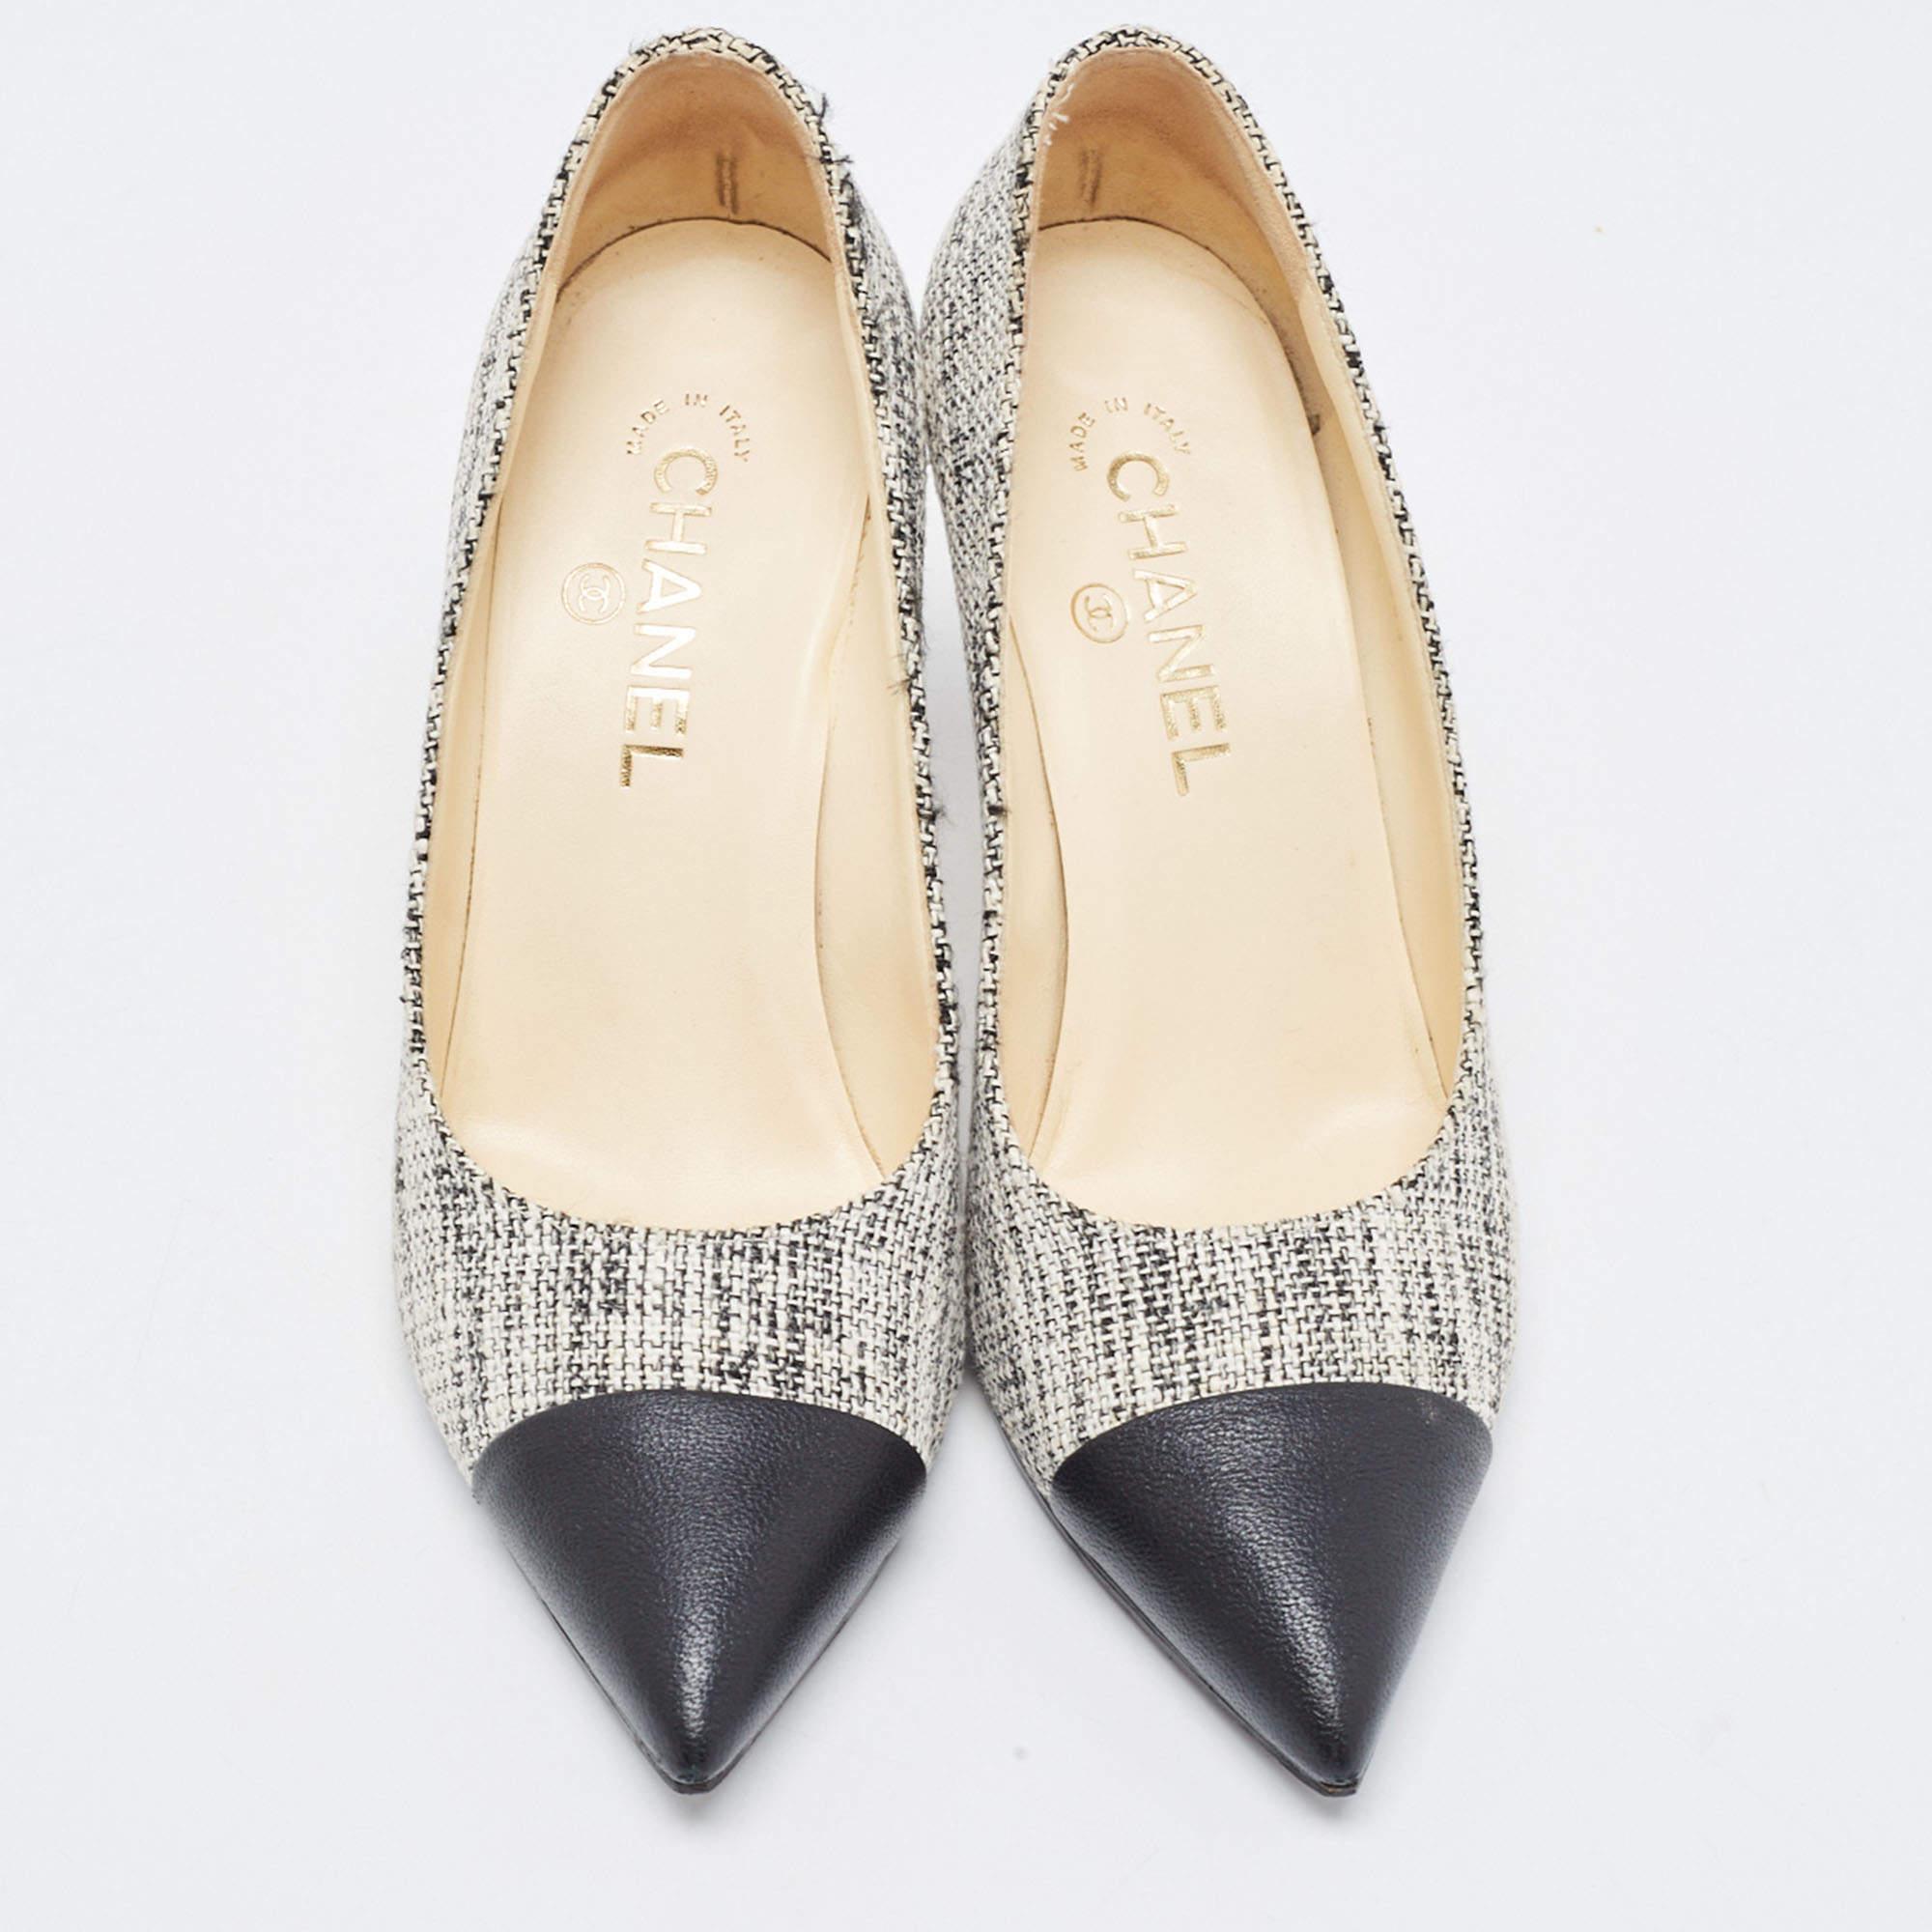 This pair of pumps made from tweed fabric is ideal to be paired with any outfit of your choice. These stylish pumps from Chanel make a perfect addition to your collection of footwear. This classy pair is designed with pointed leather cap toes and